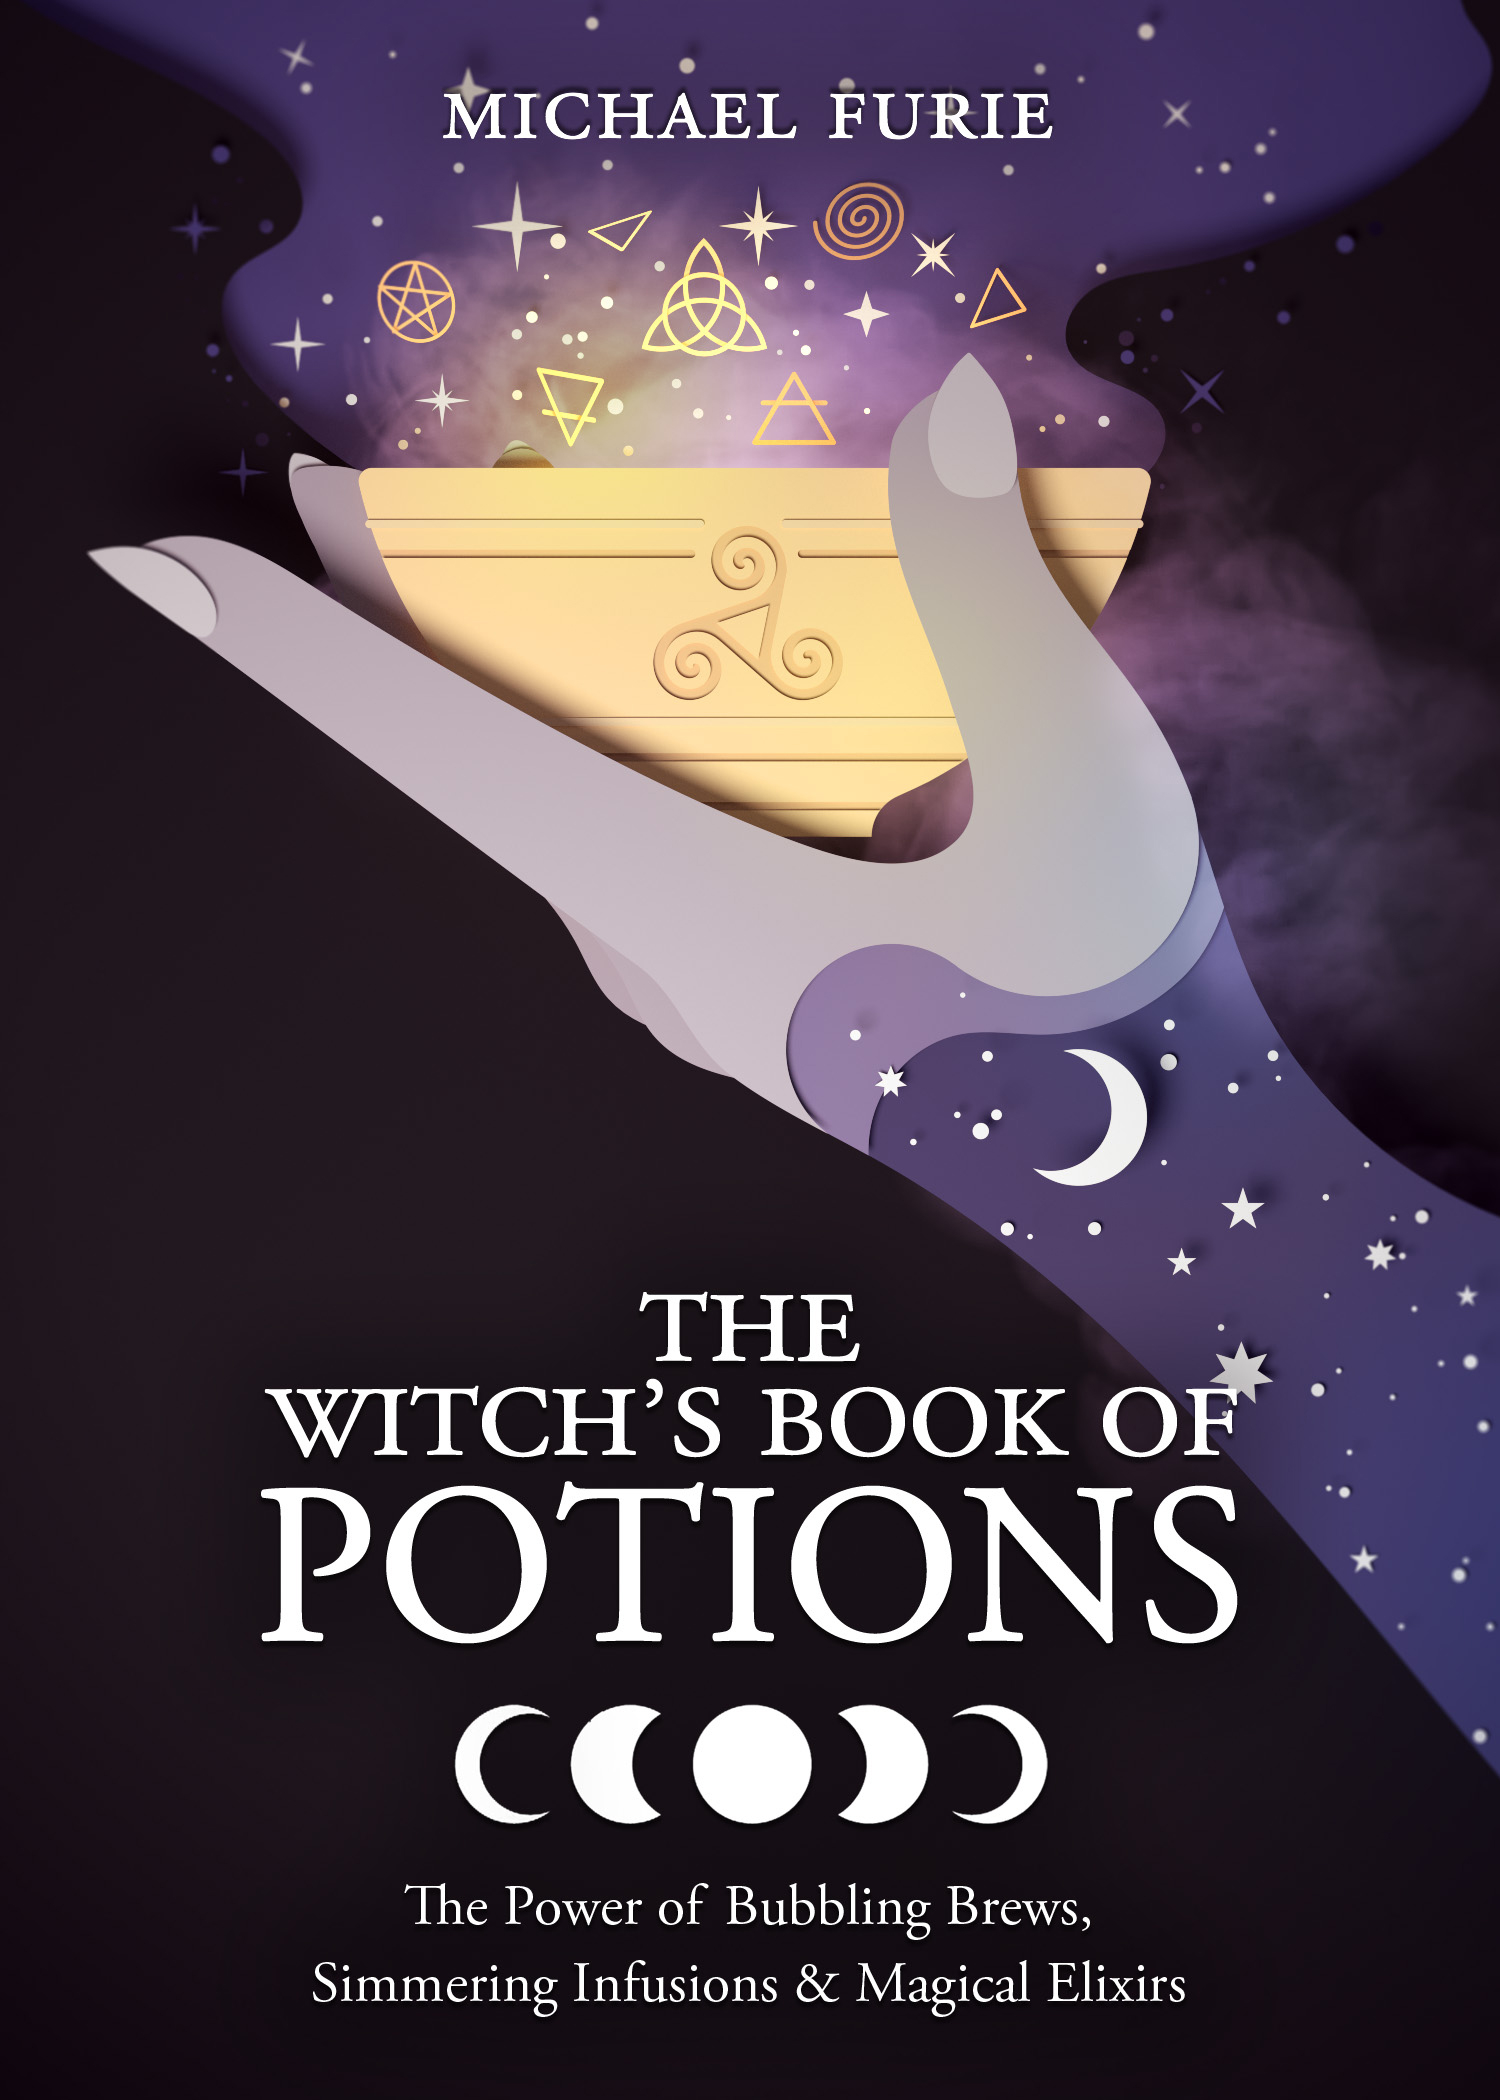 Witchs_Book_Of_Potions---LLewellyn_Worldwide.jpg